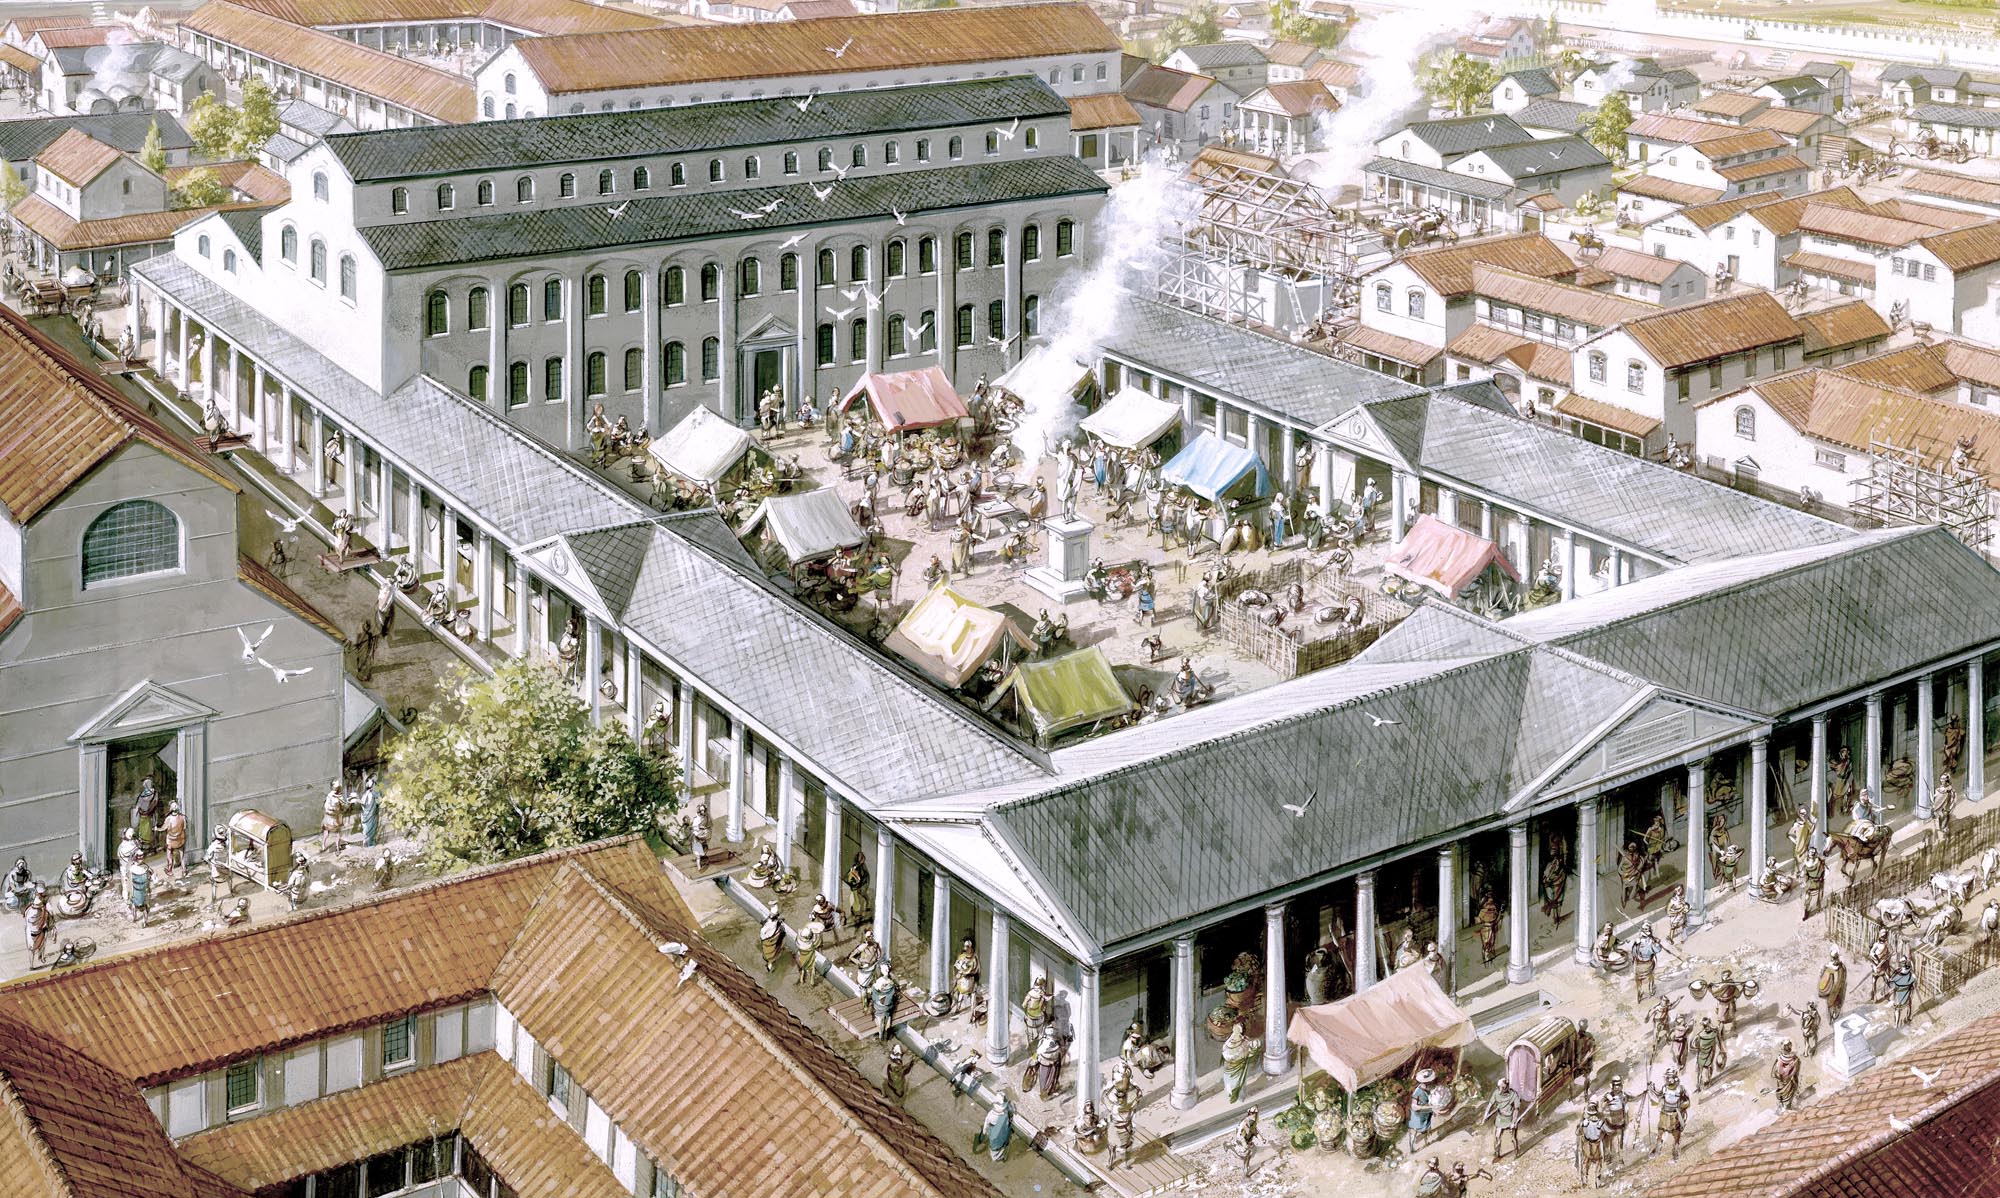 The Roman Forum and Basilica as they may have looked from the south-west during the early 3rd century CE - Leicester Arts and Museums Service / Mike Codd